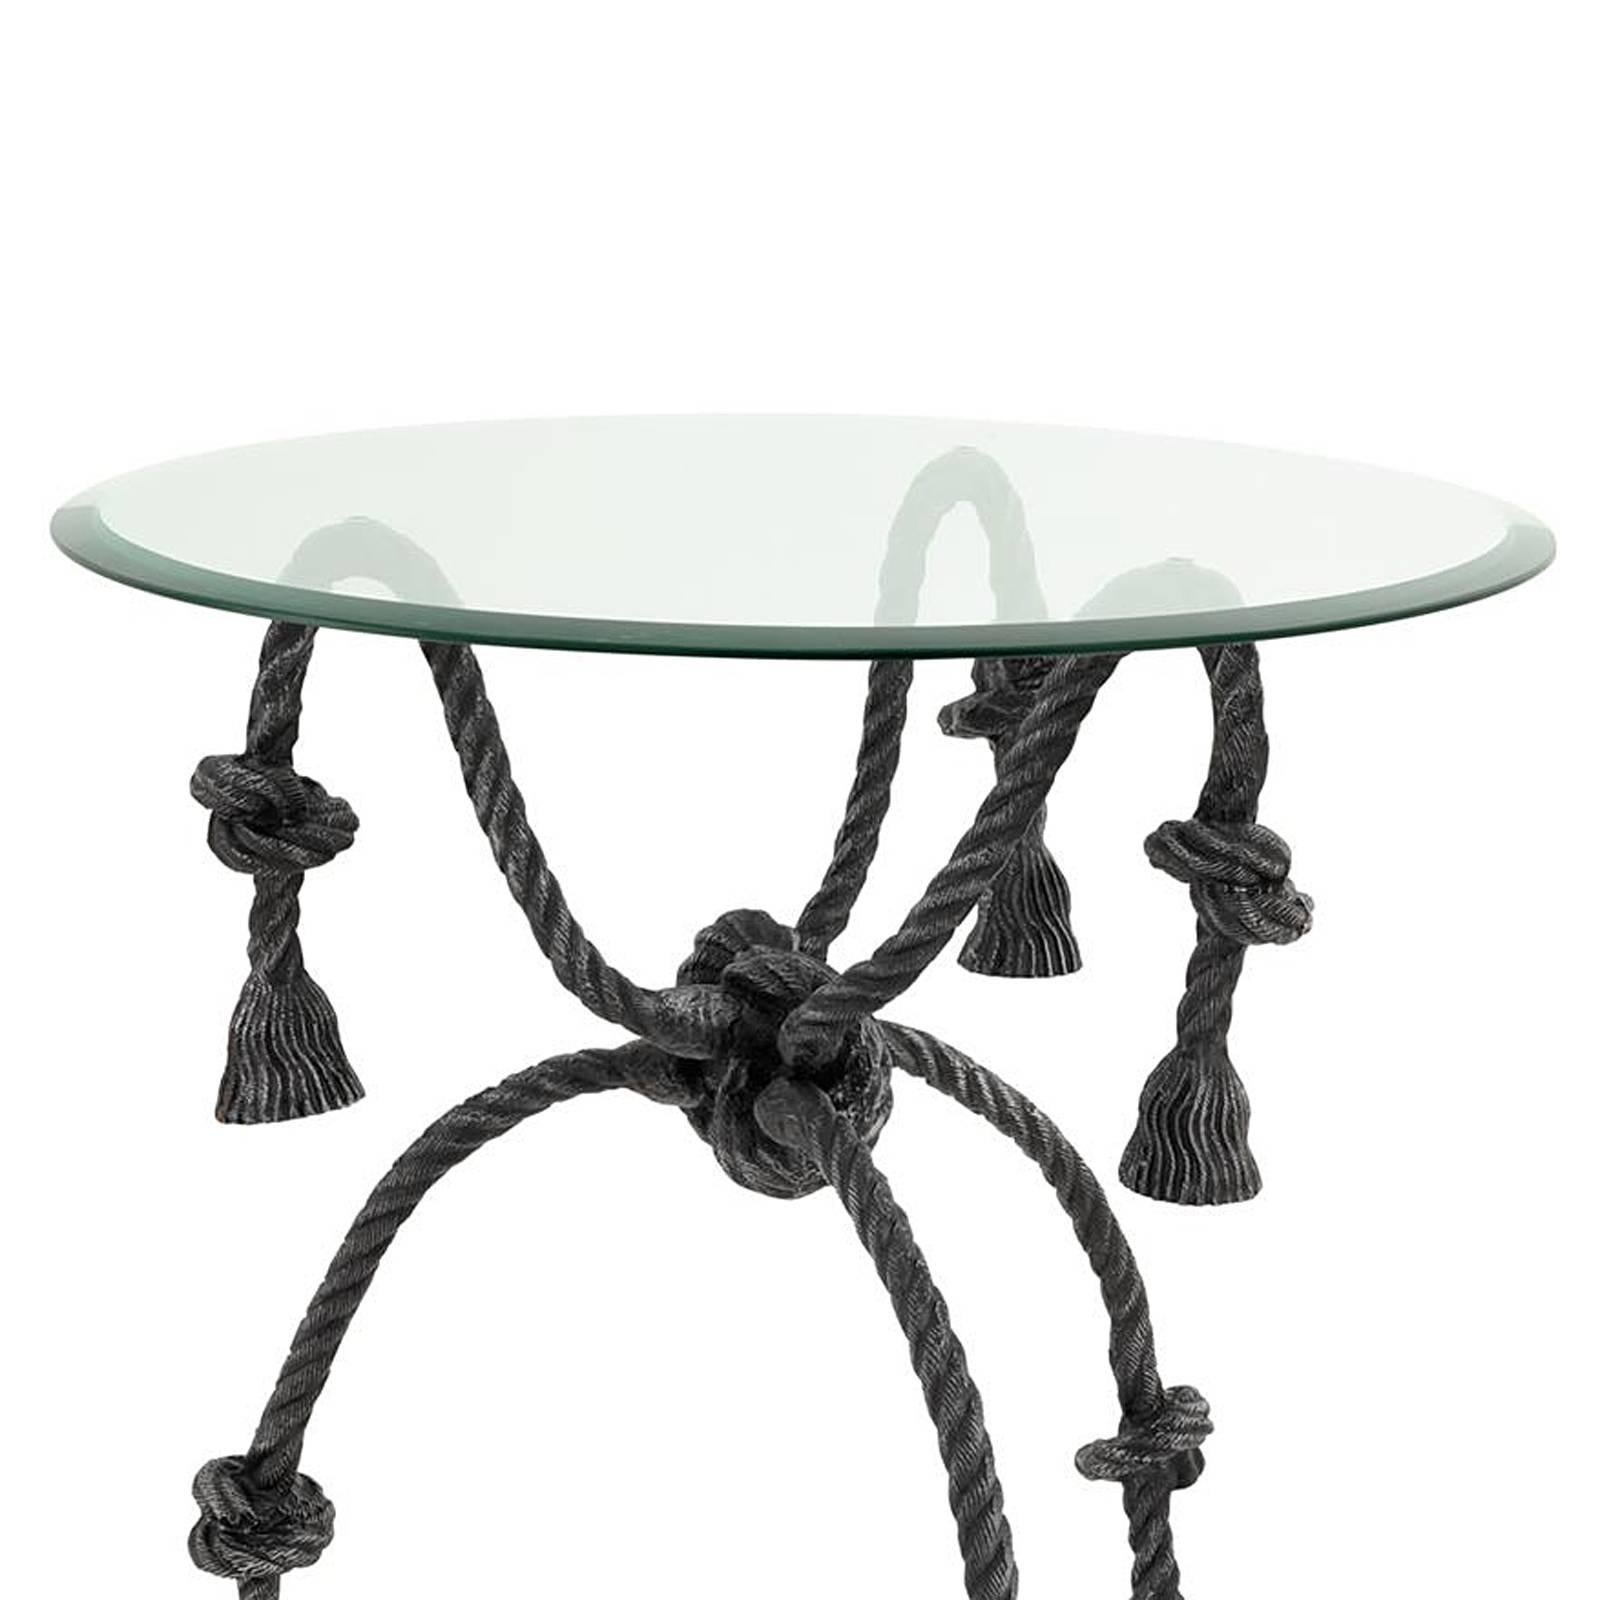 Side table intertwine with base in gunmetal
finish with bevelled clear glass top.
